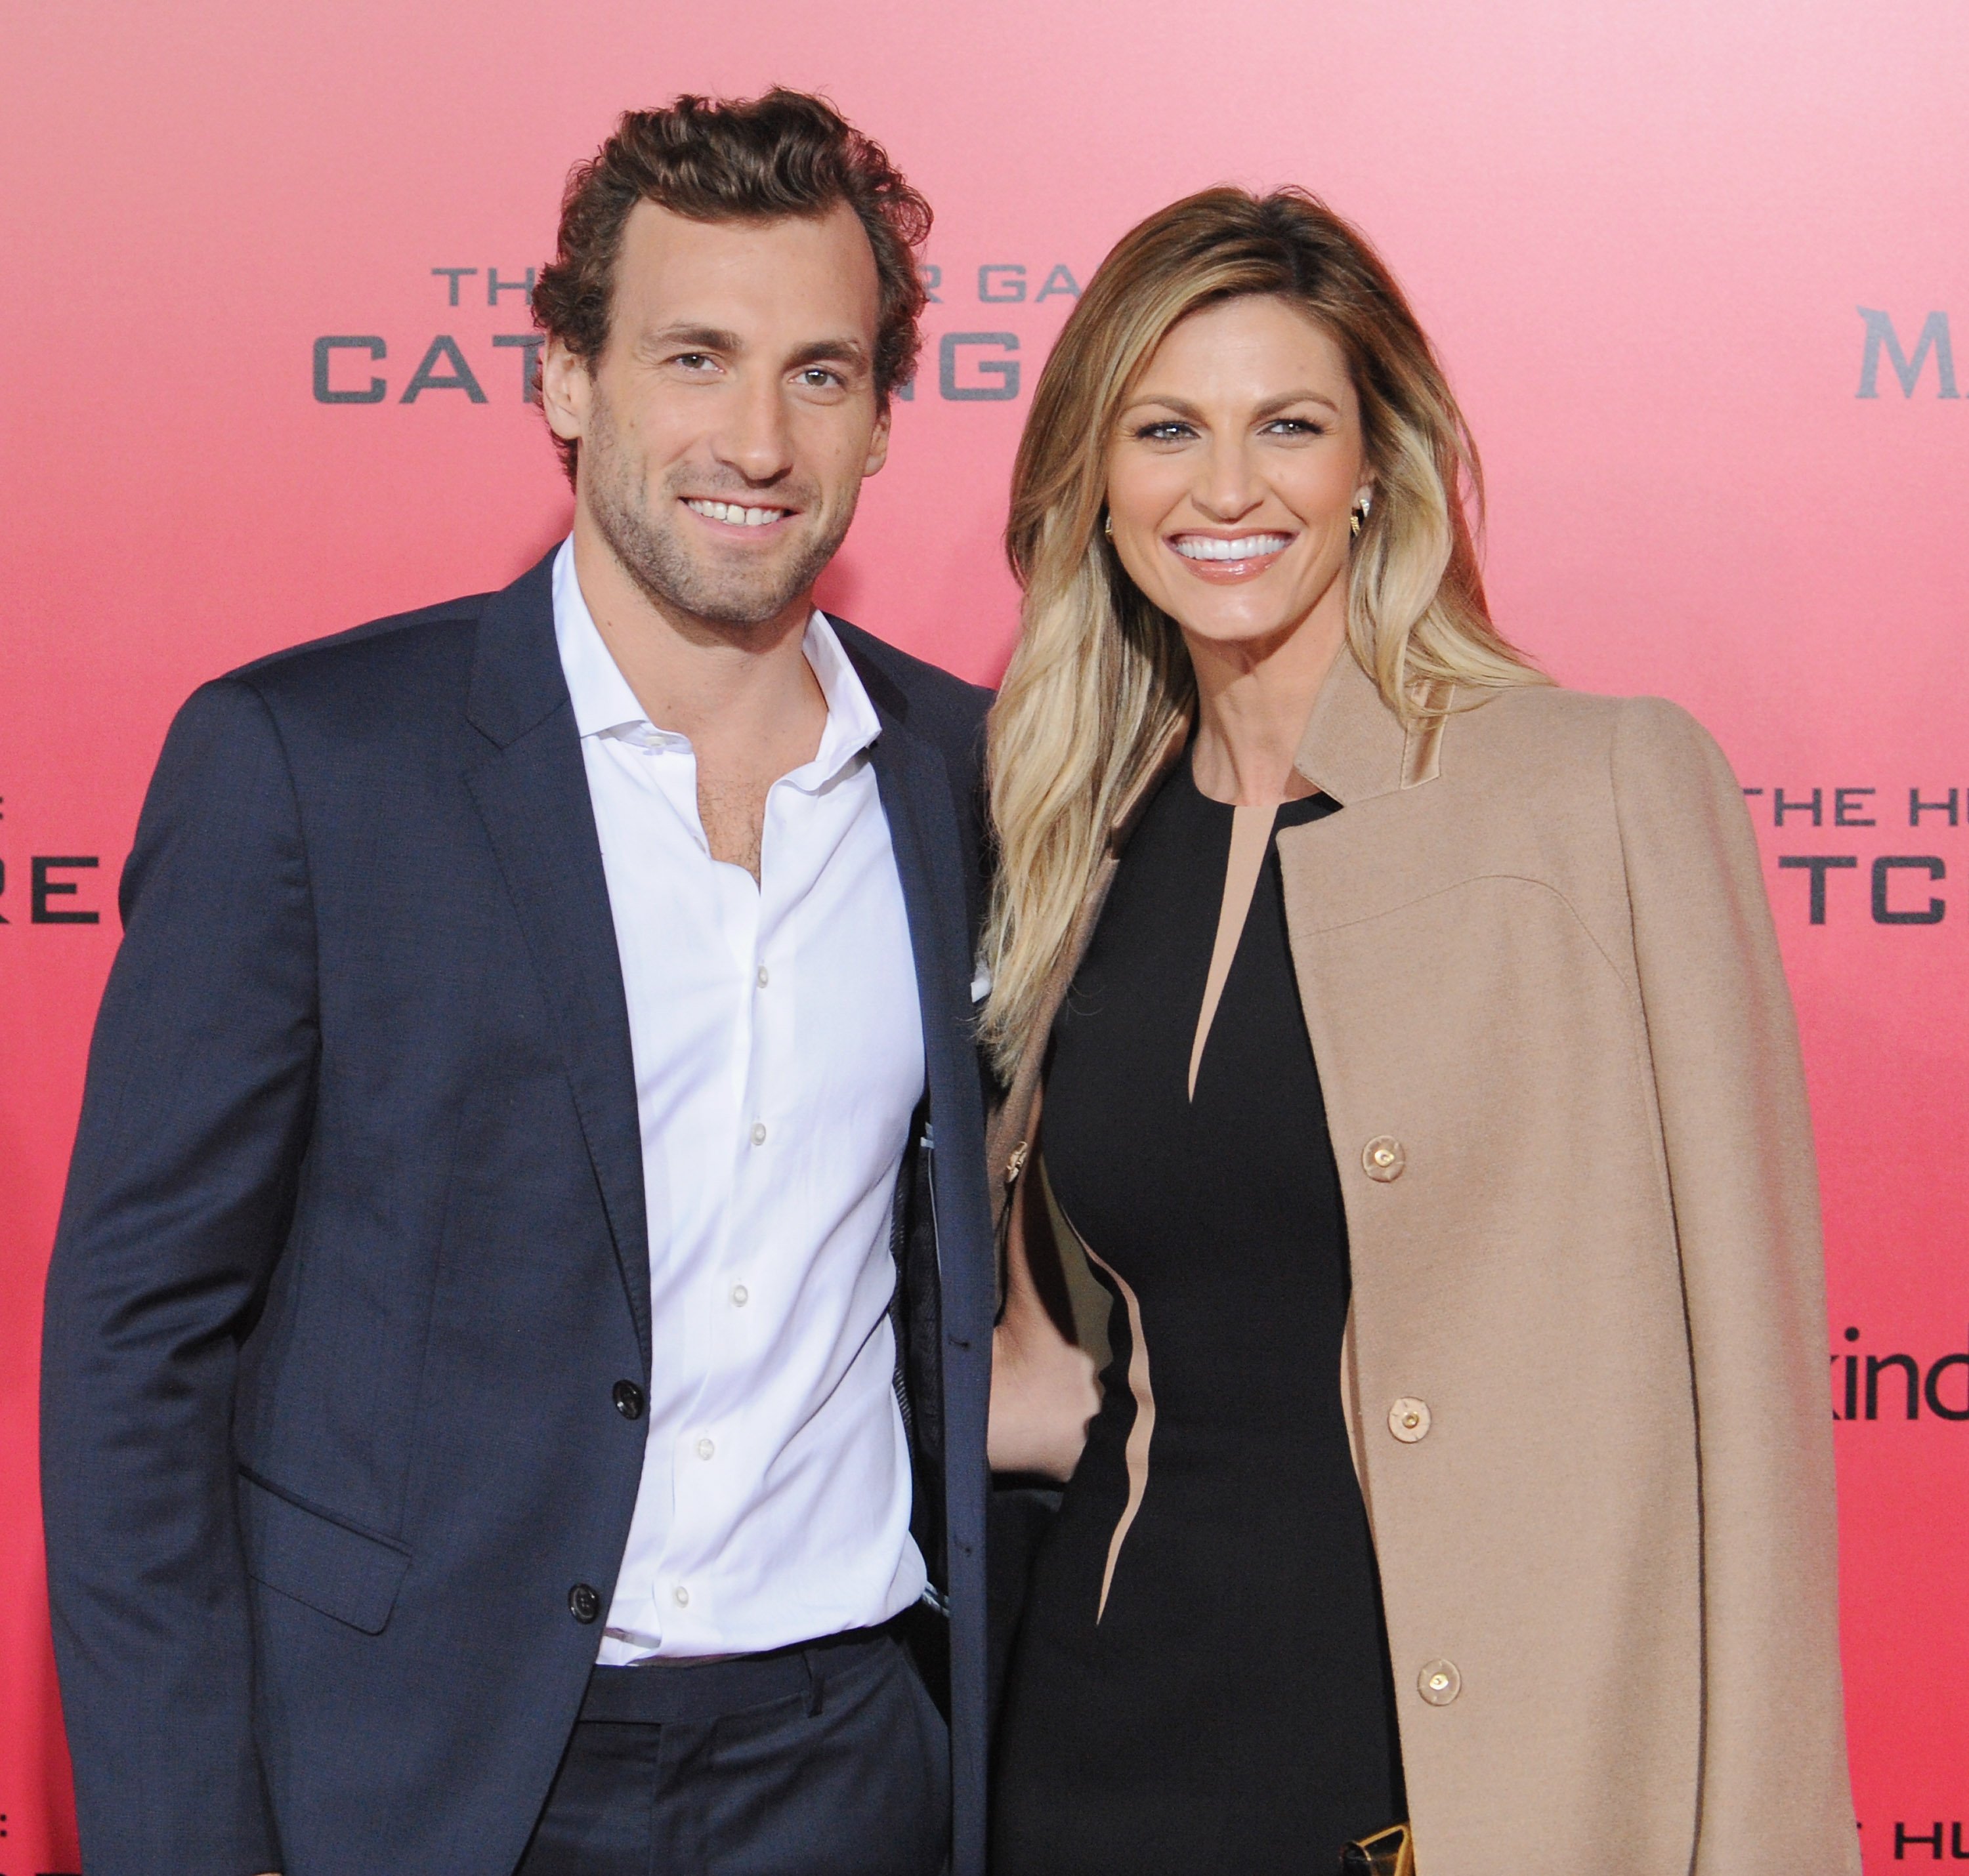 Jarret Stoll and Erin Andrews at the Los Angeles premiere of "The Hunger Games: Catching Fire" on November 18, 2013 | Source: Getty Images